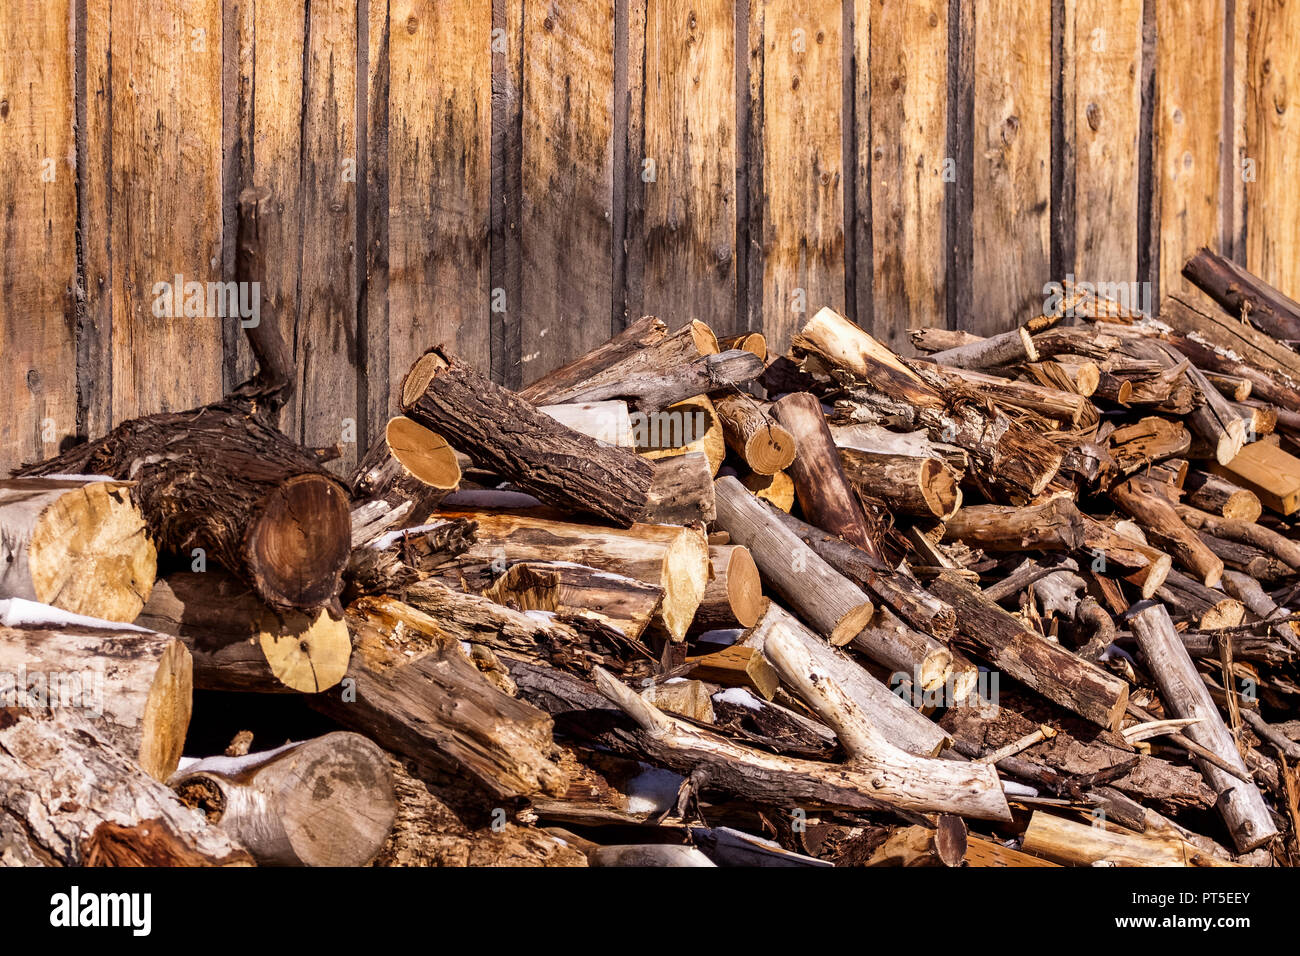 Large pile of various types of cut wood branches and logs, some with bark some not, is stacked against the wall of a building. The building has been w Stock Photo